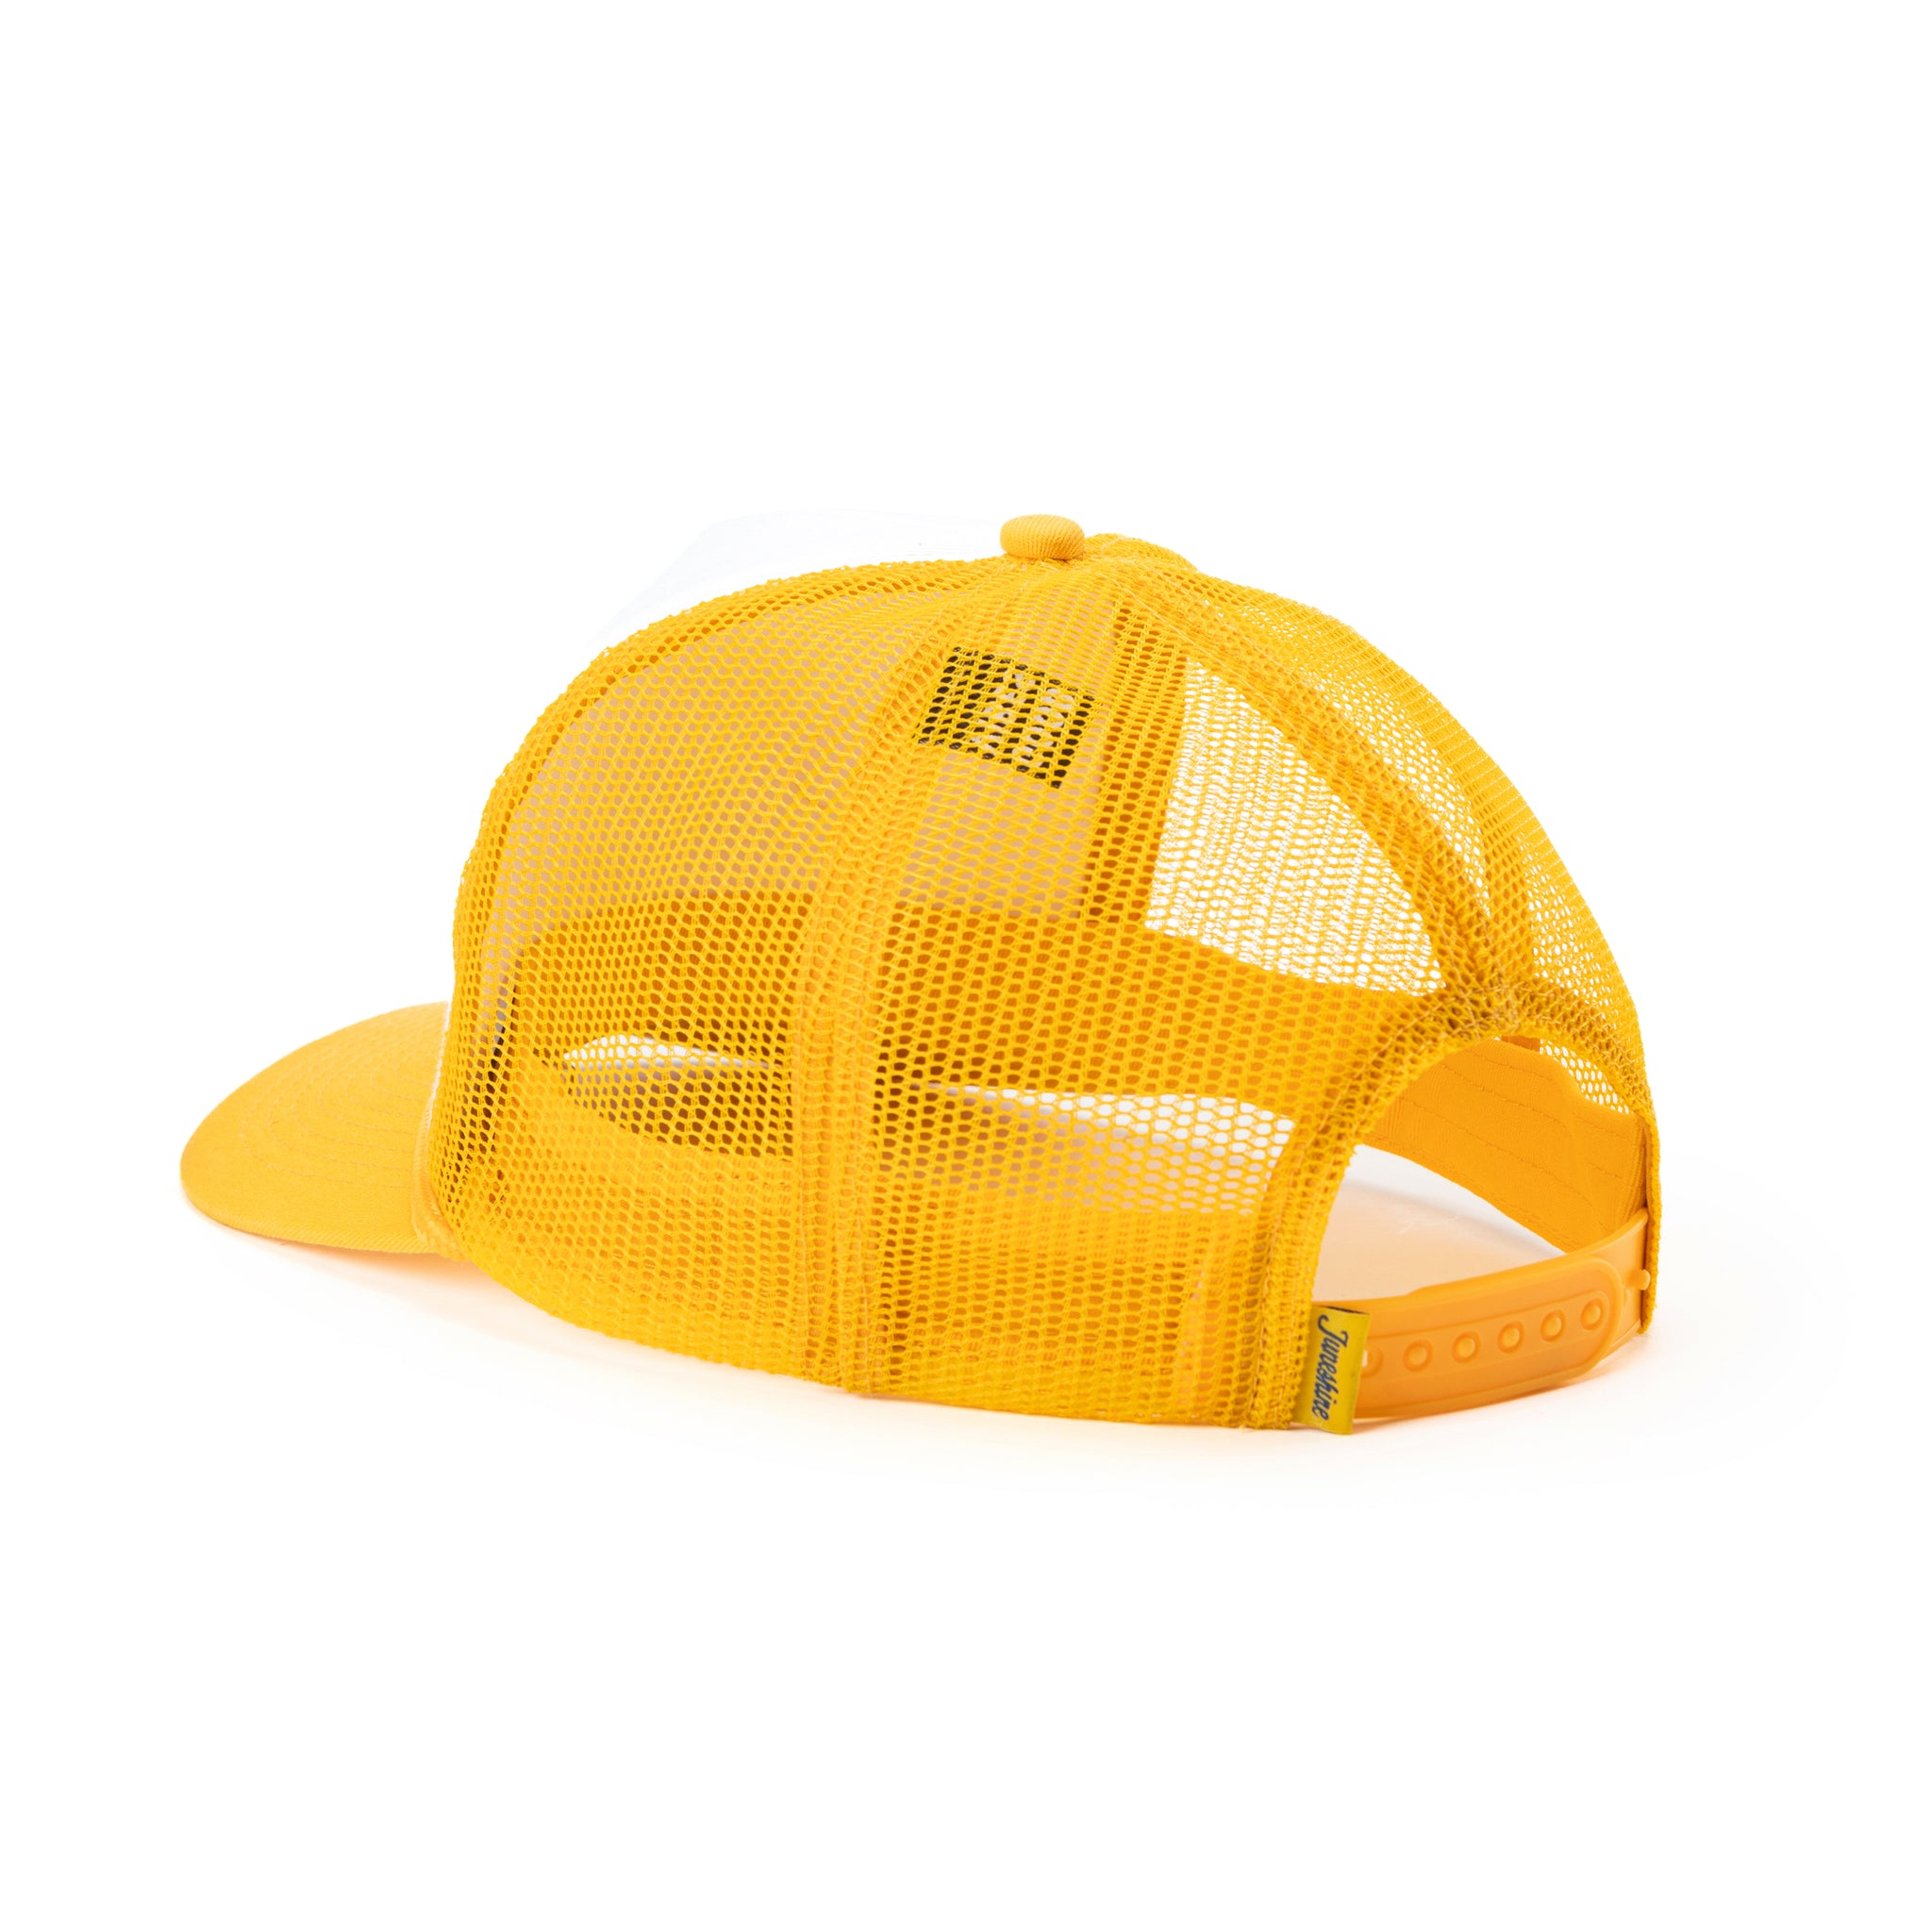 Back view of yellow trucker hat with adjustable strap and tag that reads "June Shine"